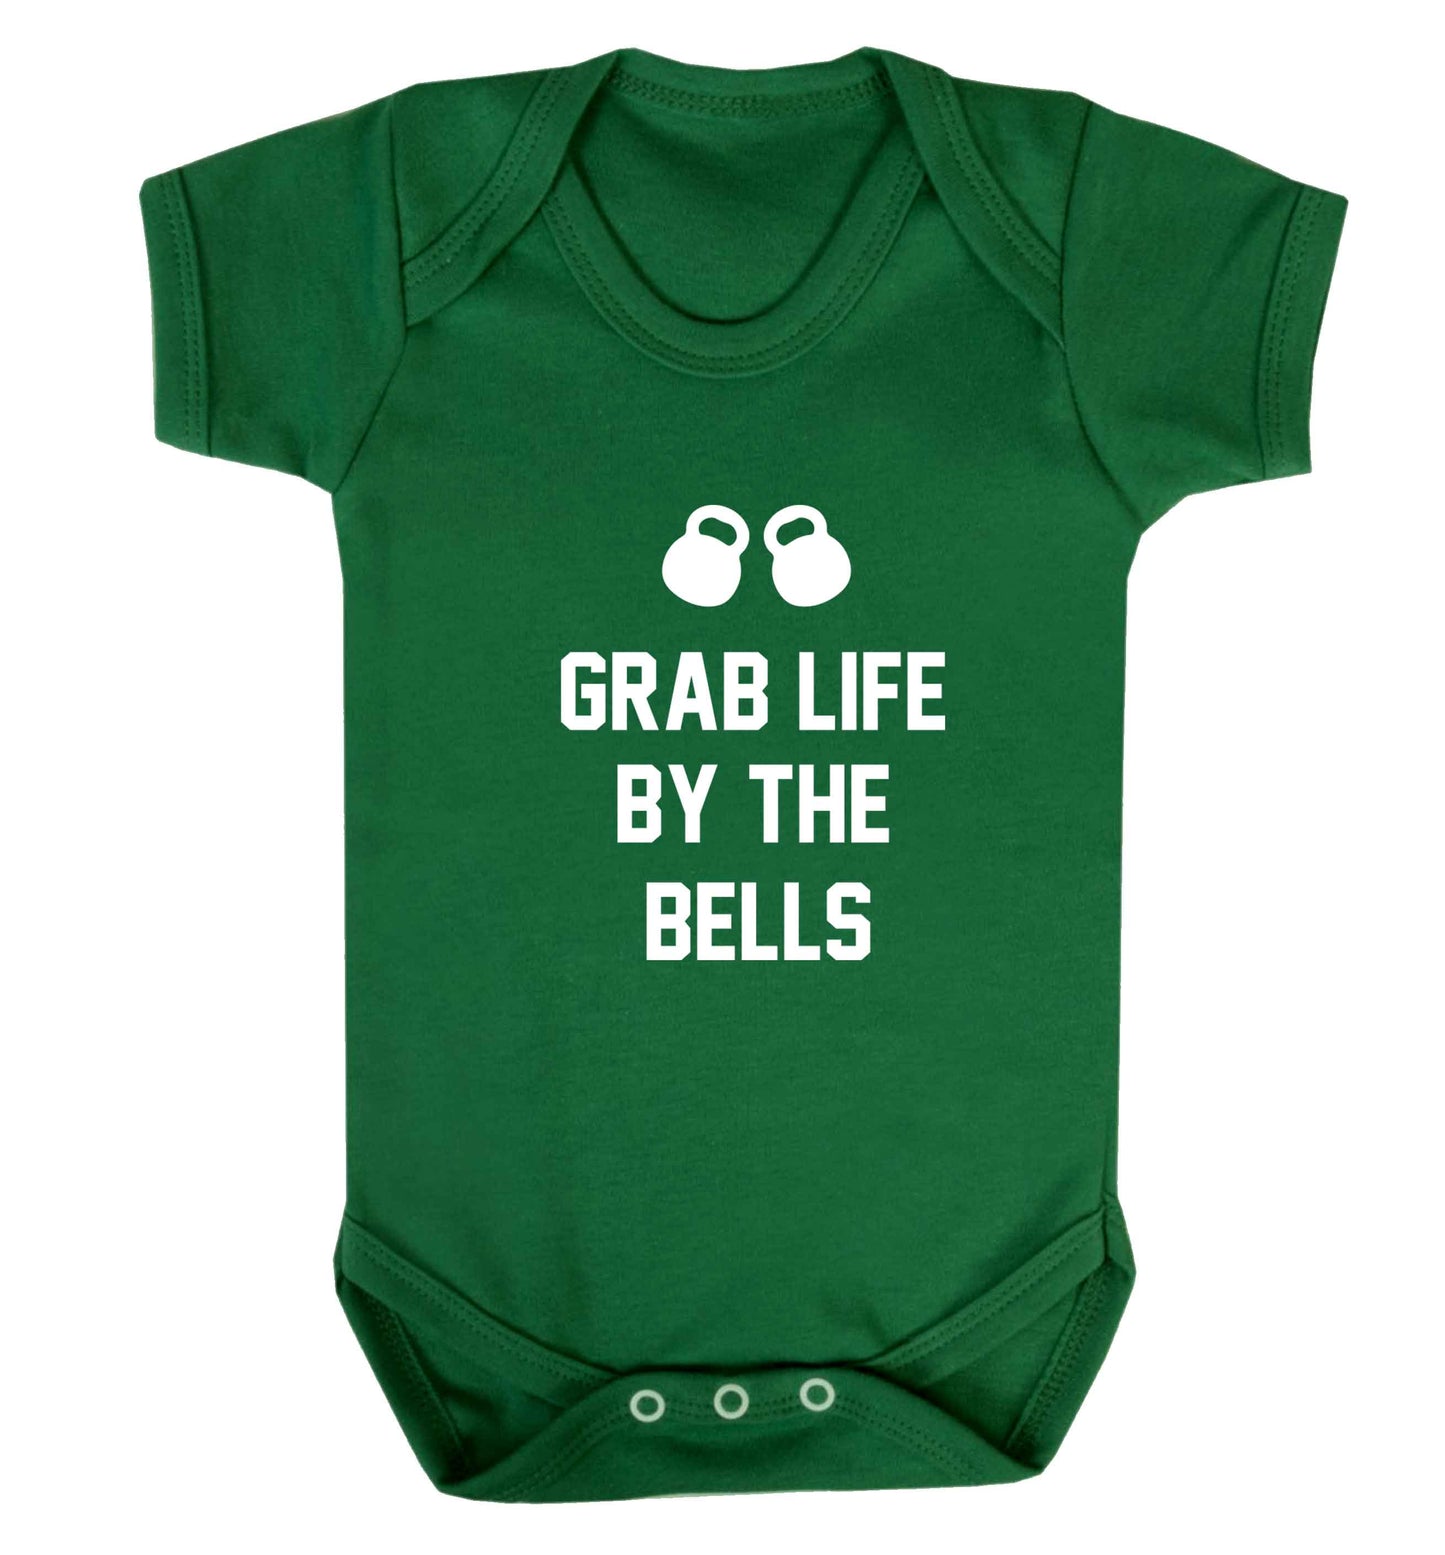 Grab life by the bells baby vest green 18-24 months